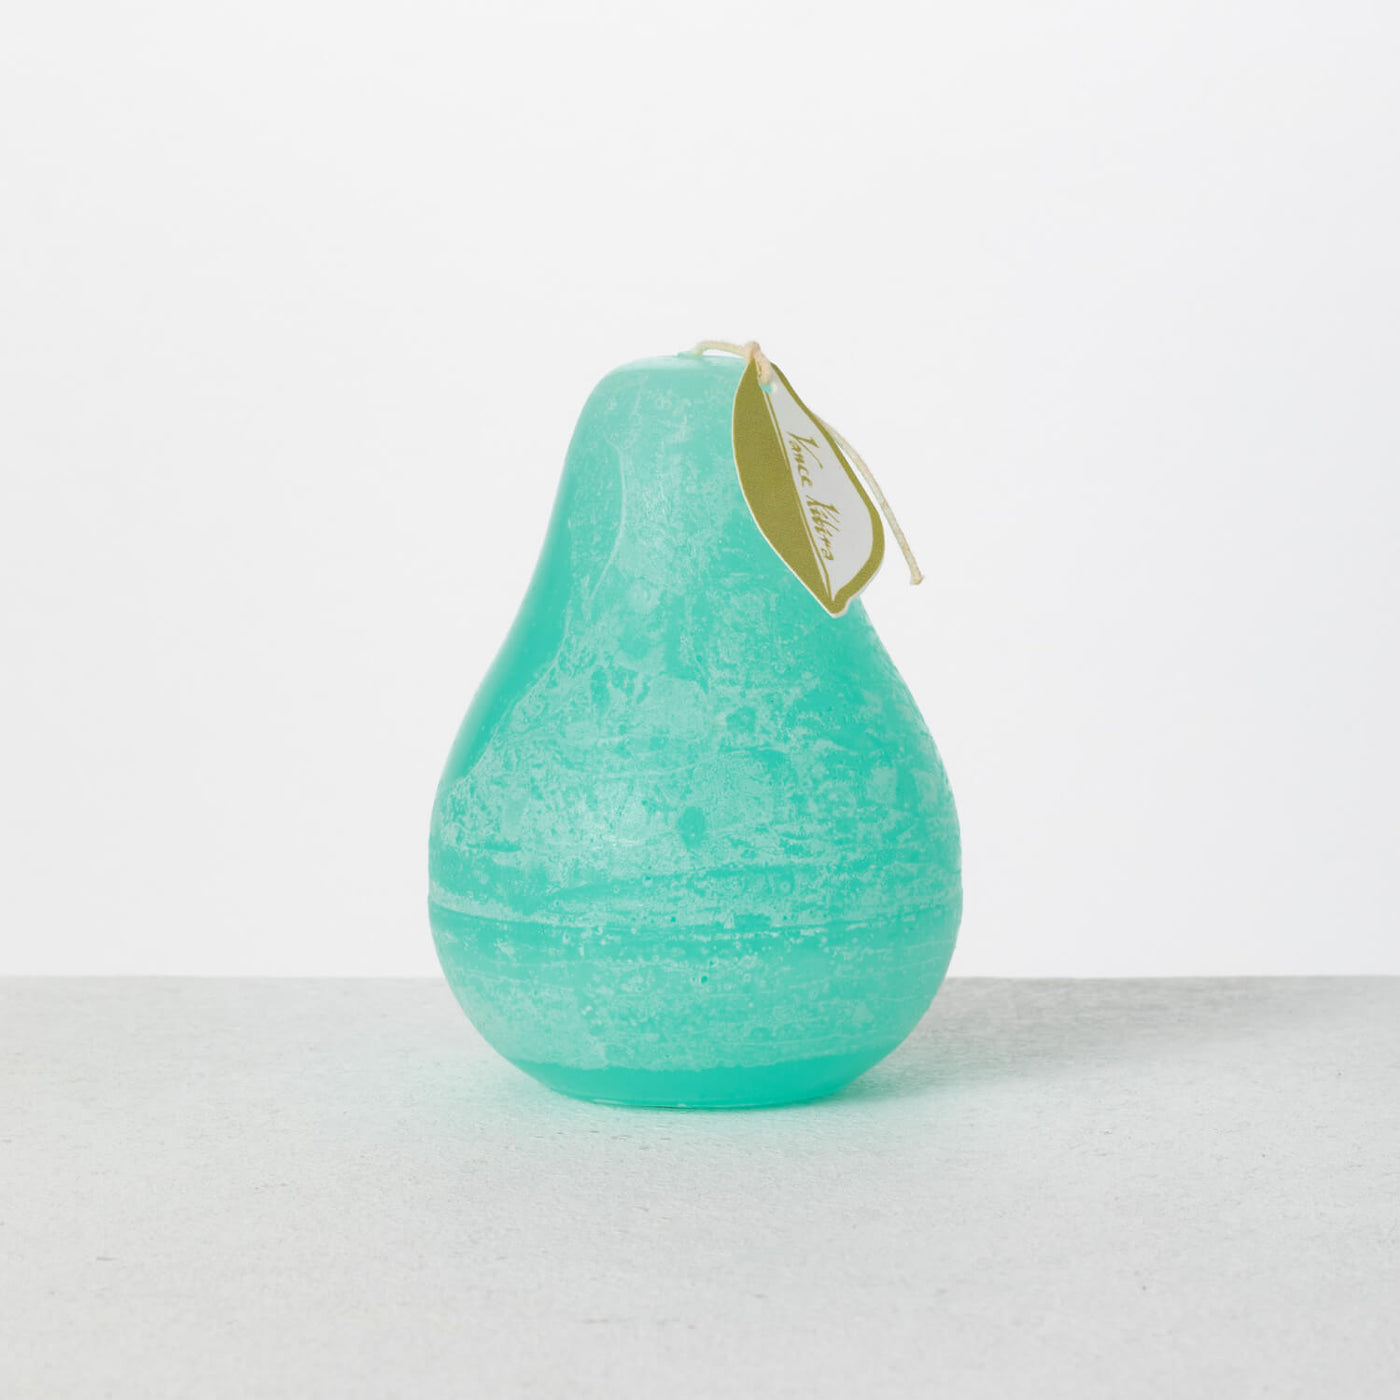 Vance Kitira Turquoise Timber Pear Candle